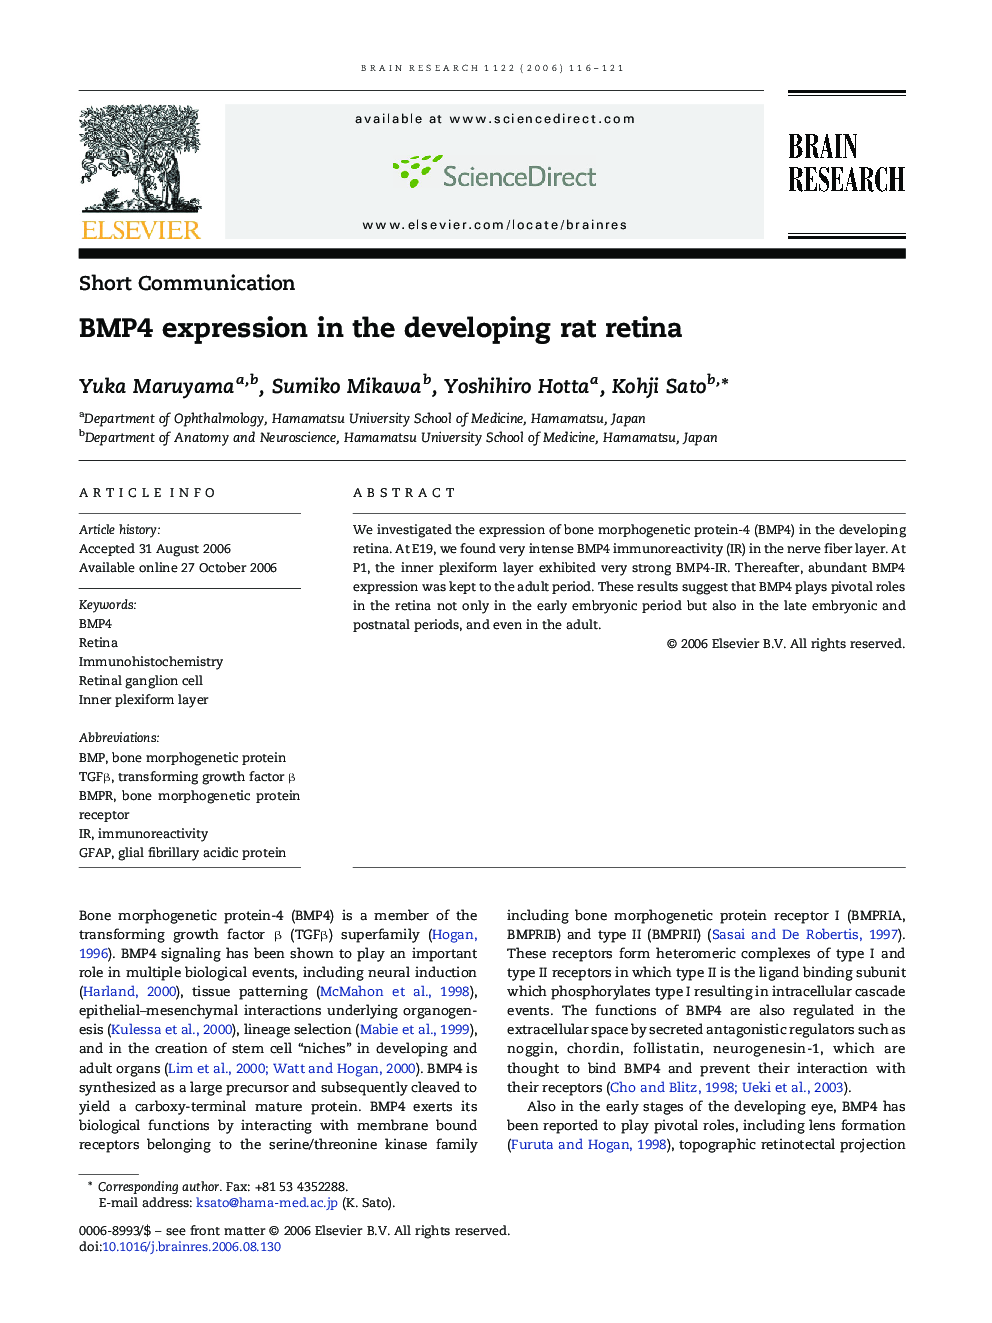 BMP4 expression in the developing rat retina